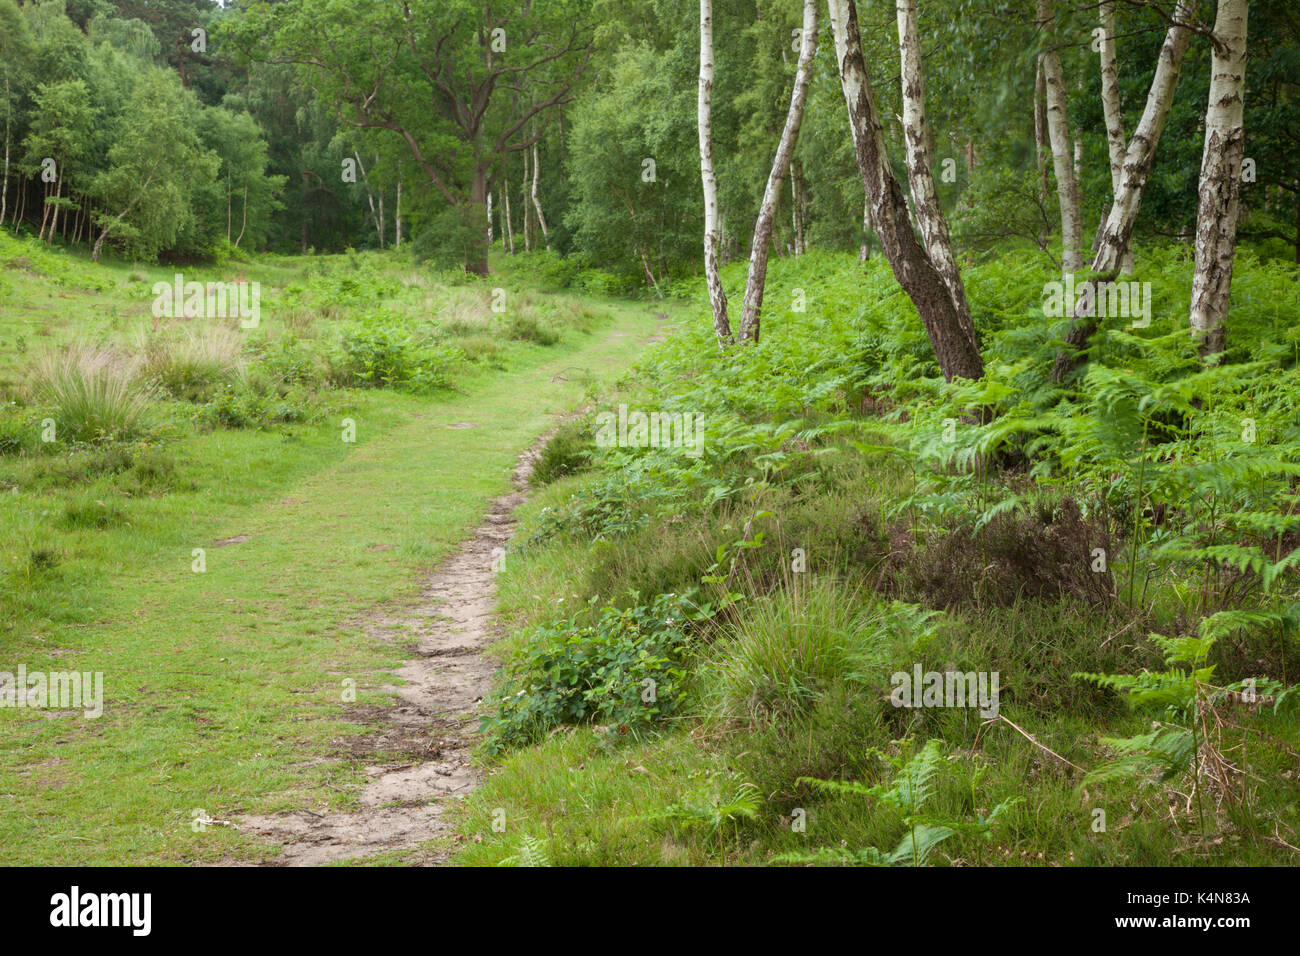 A path enters woodland on the edge of Dersingham Bog, part of the varied heathland landscape to be found near Kings Lynn in Norfolk, England. Stock Photo